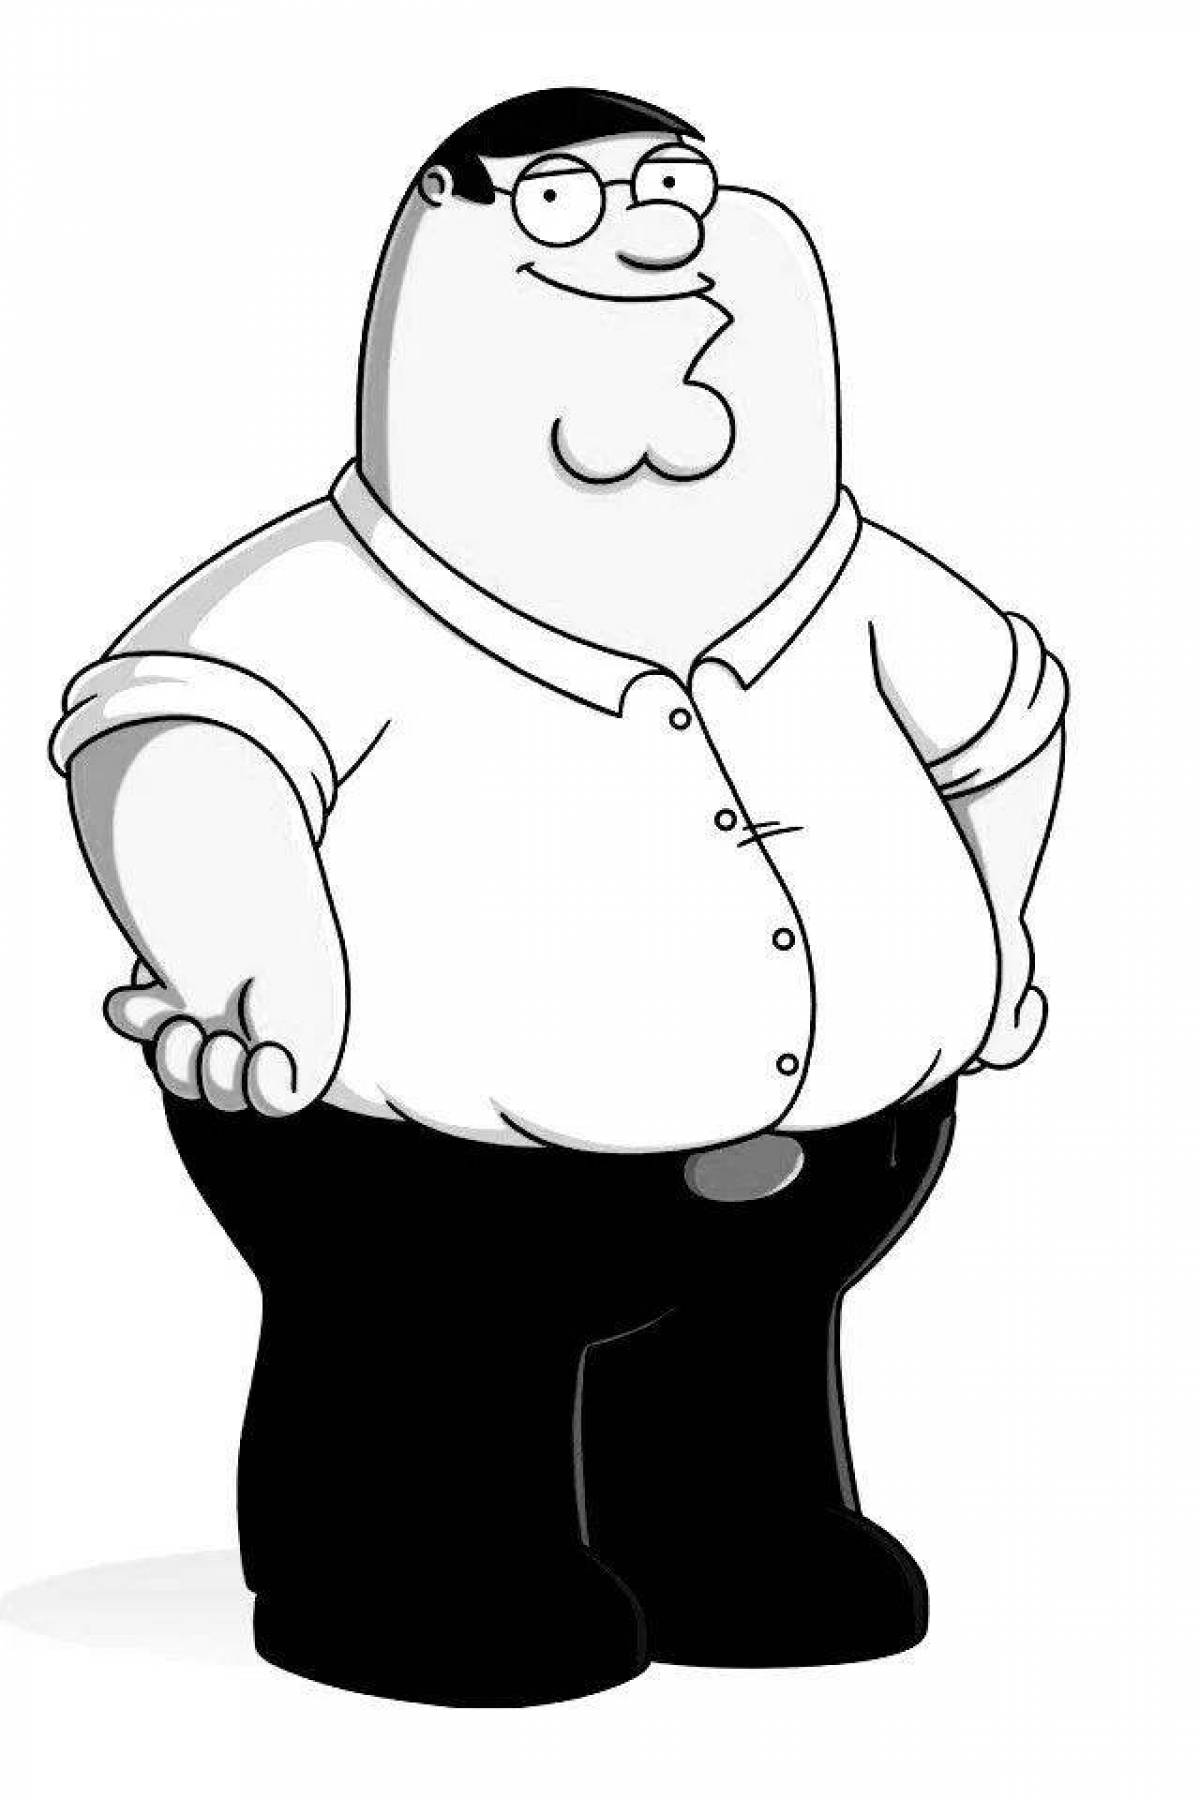 Peter griffin #1